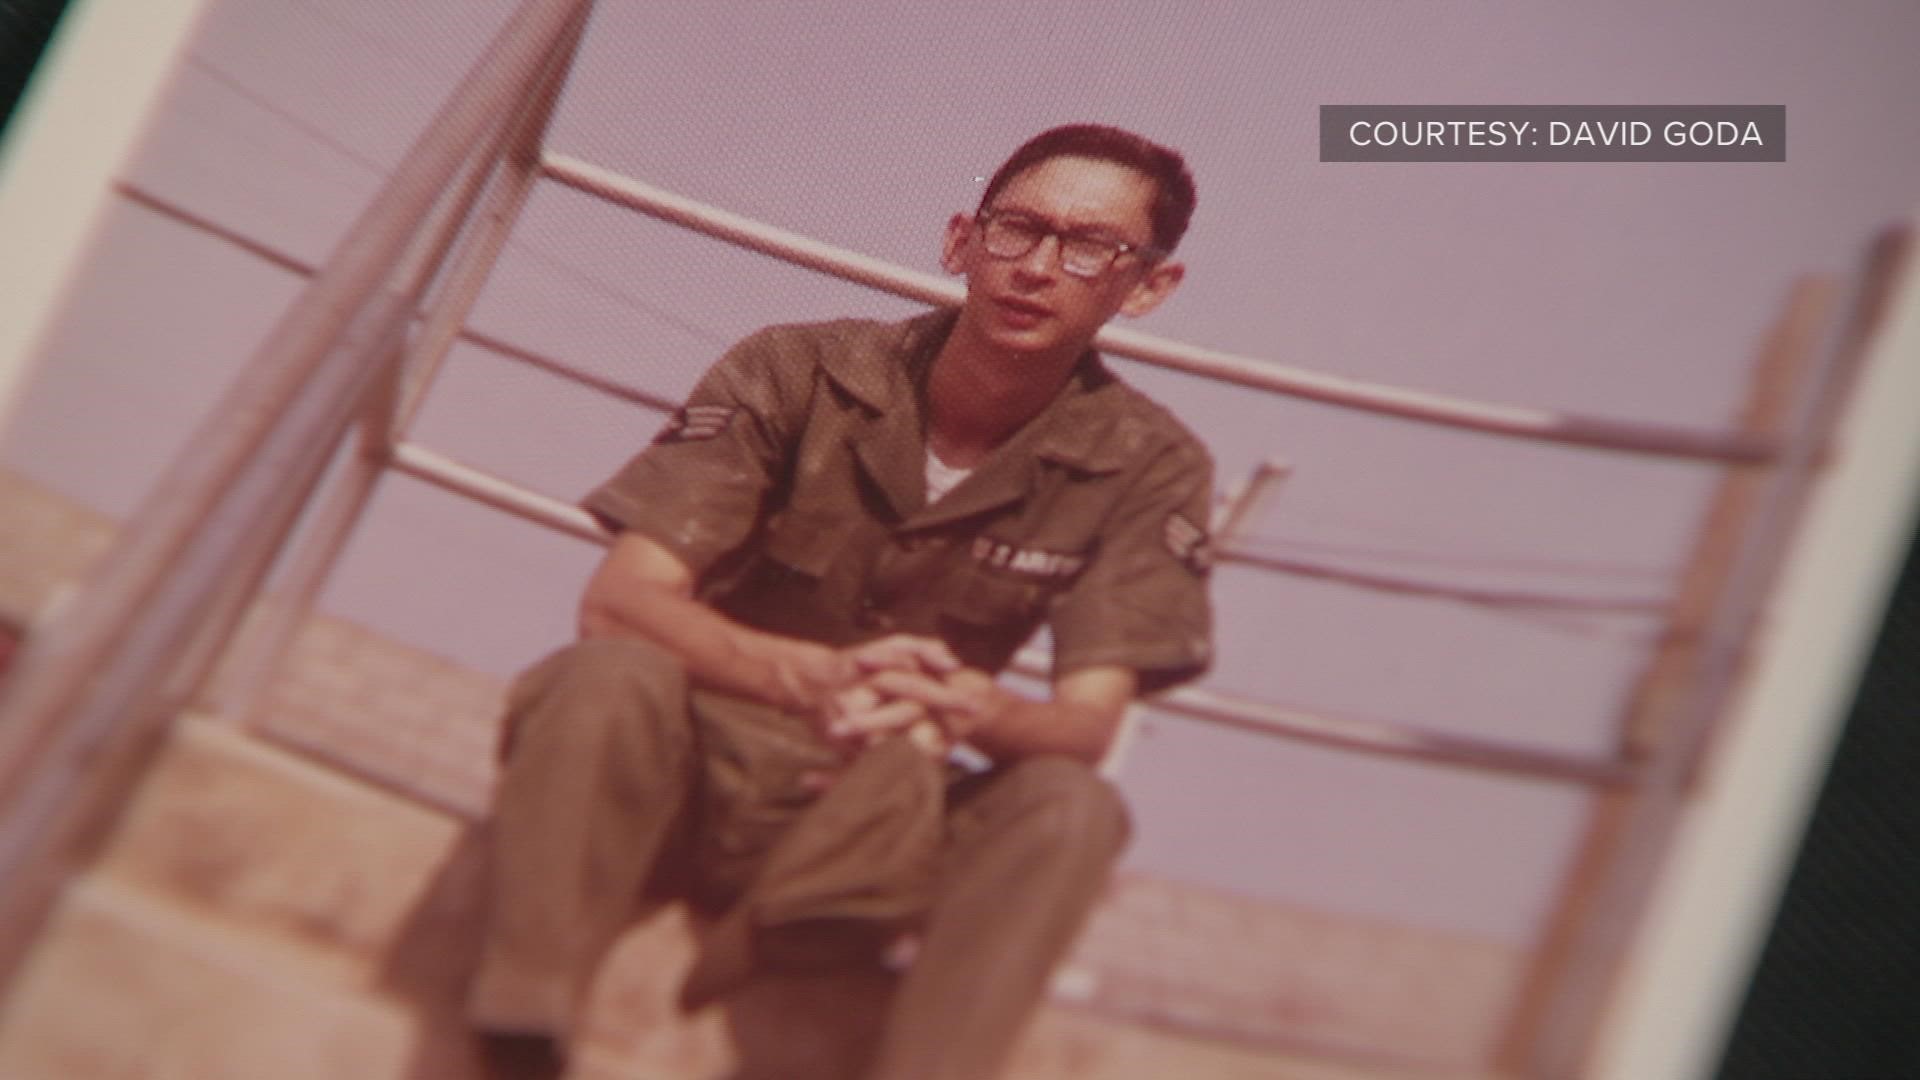 Former Air Force Staff Sgt. David Goda of Colorado Springs didn't think he deserved his medals and accommodations from Vietnam, but recently changed his mind.